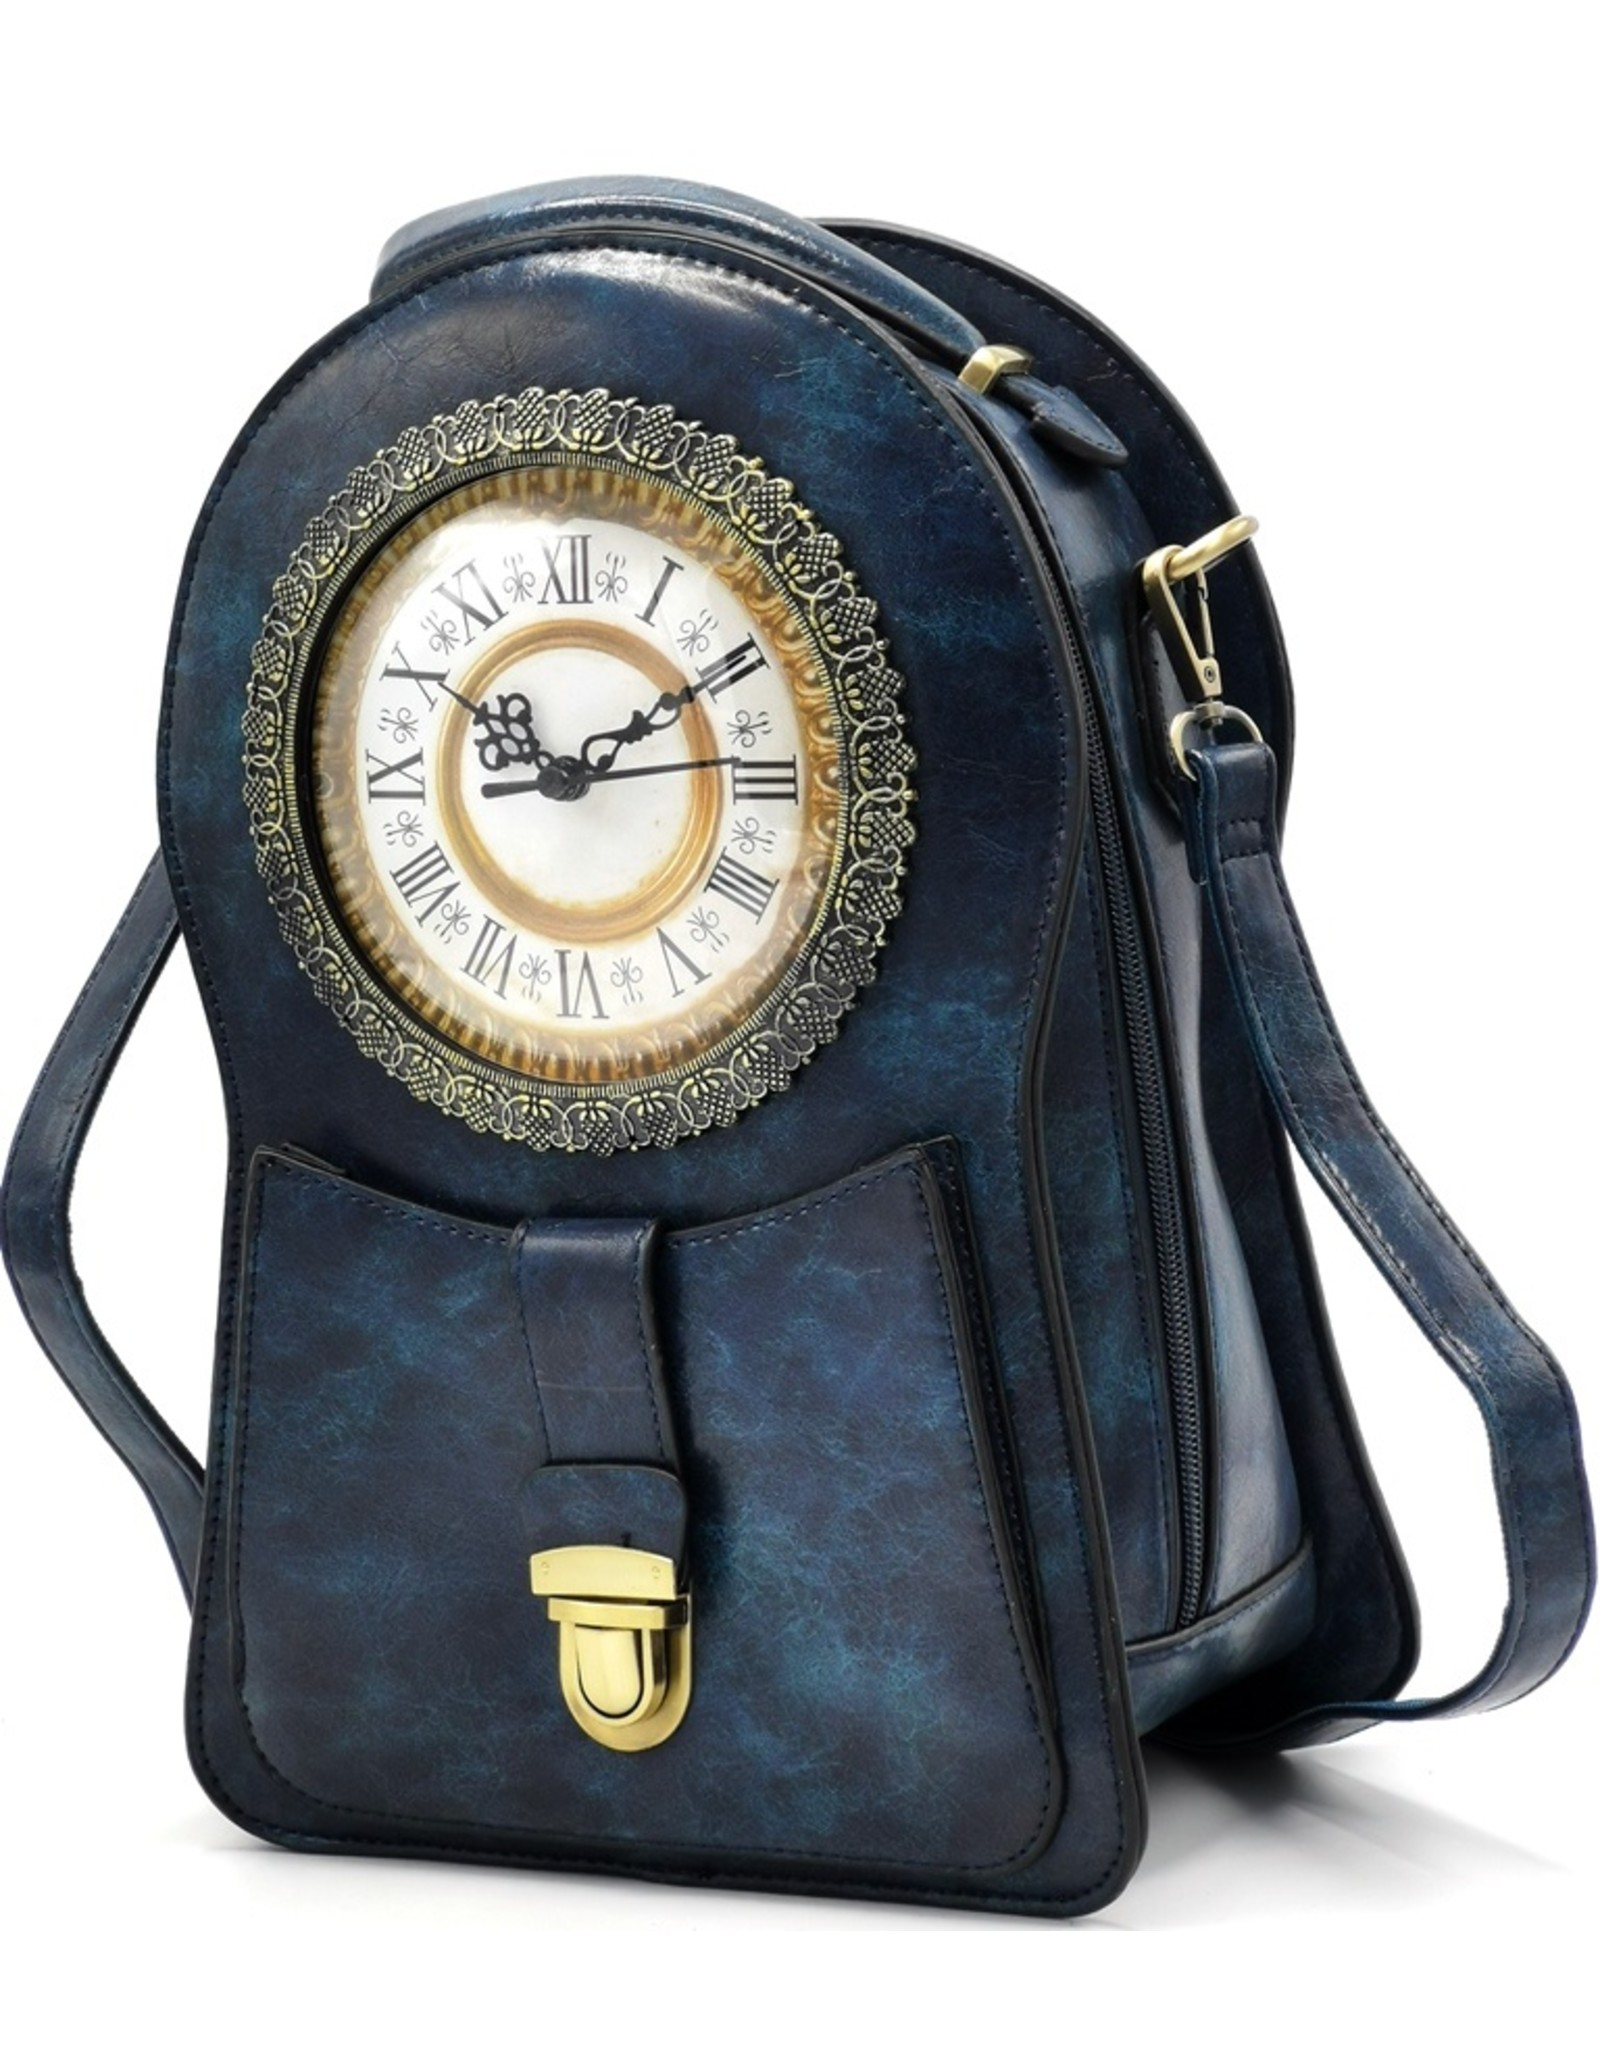 Magic Bags Gothic bags Steampunk bags - Steampunk Backpack - Shoulder bag with Real Clock